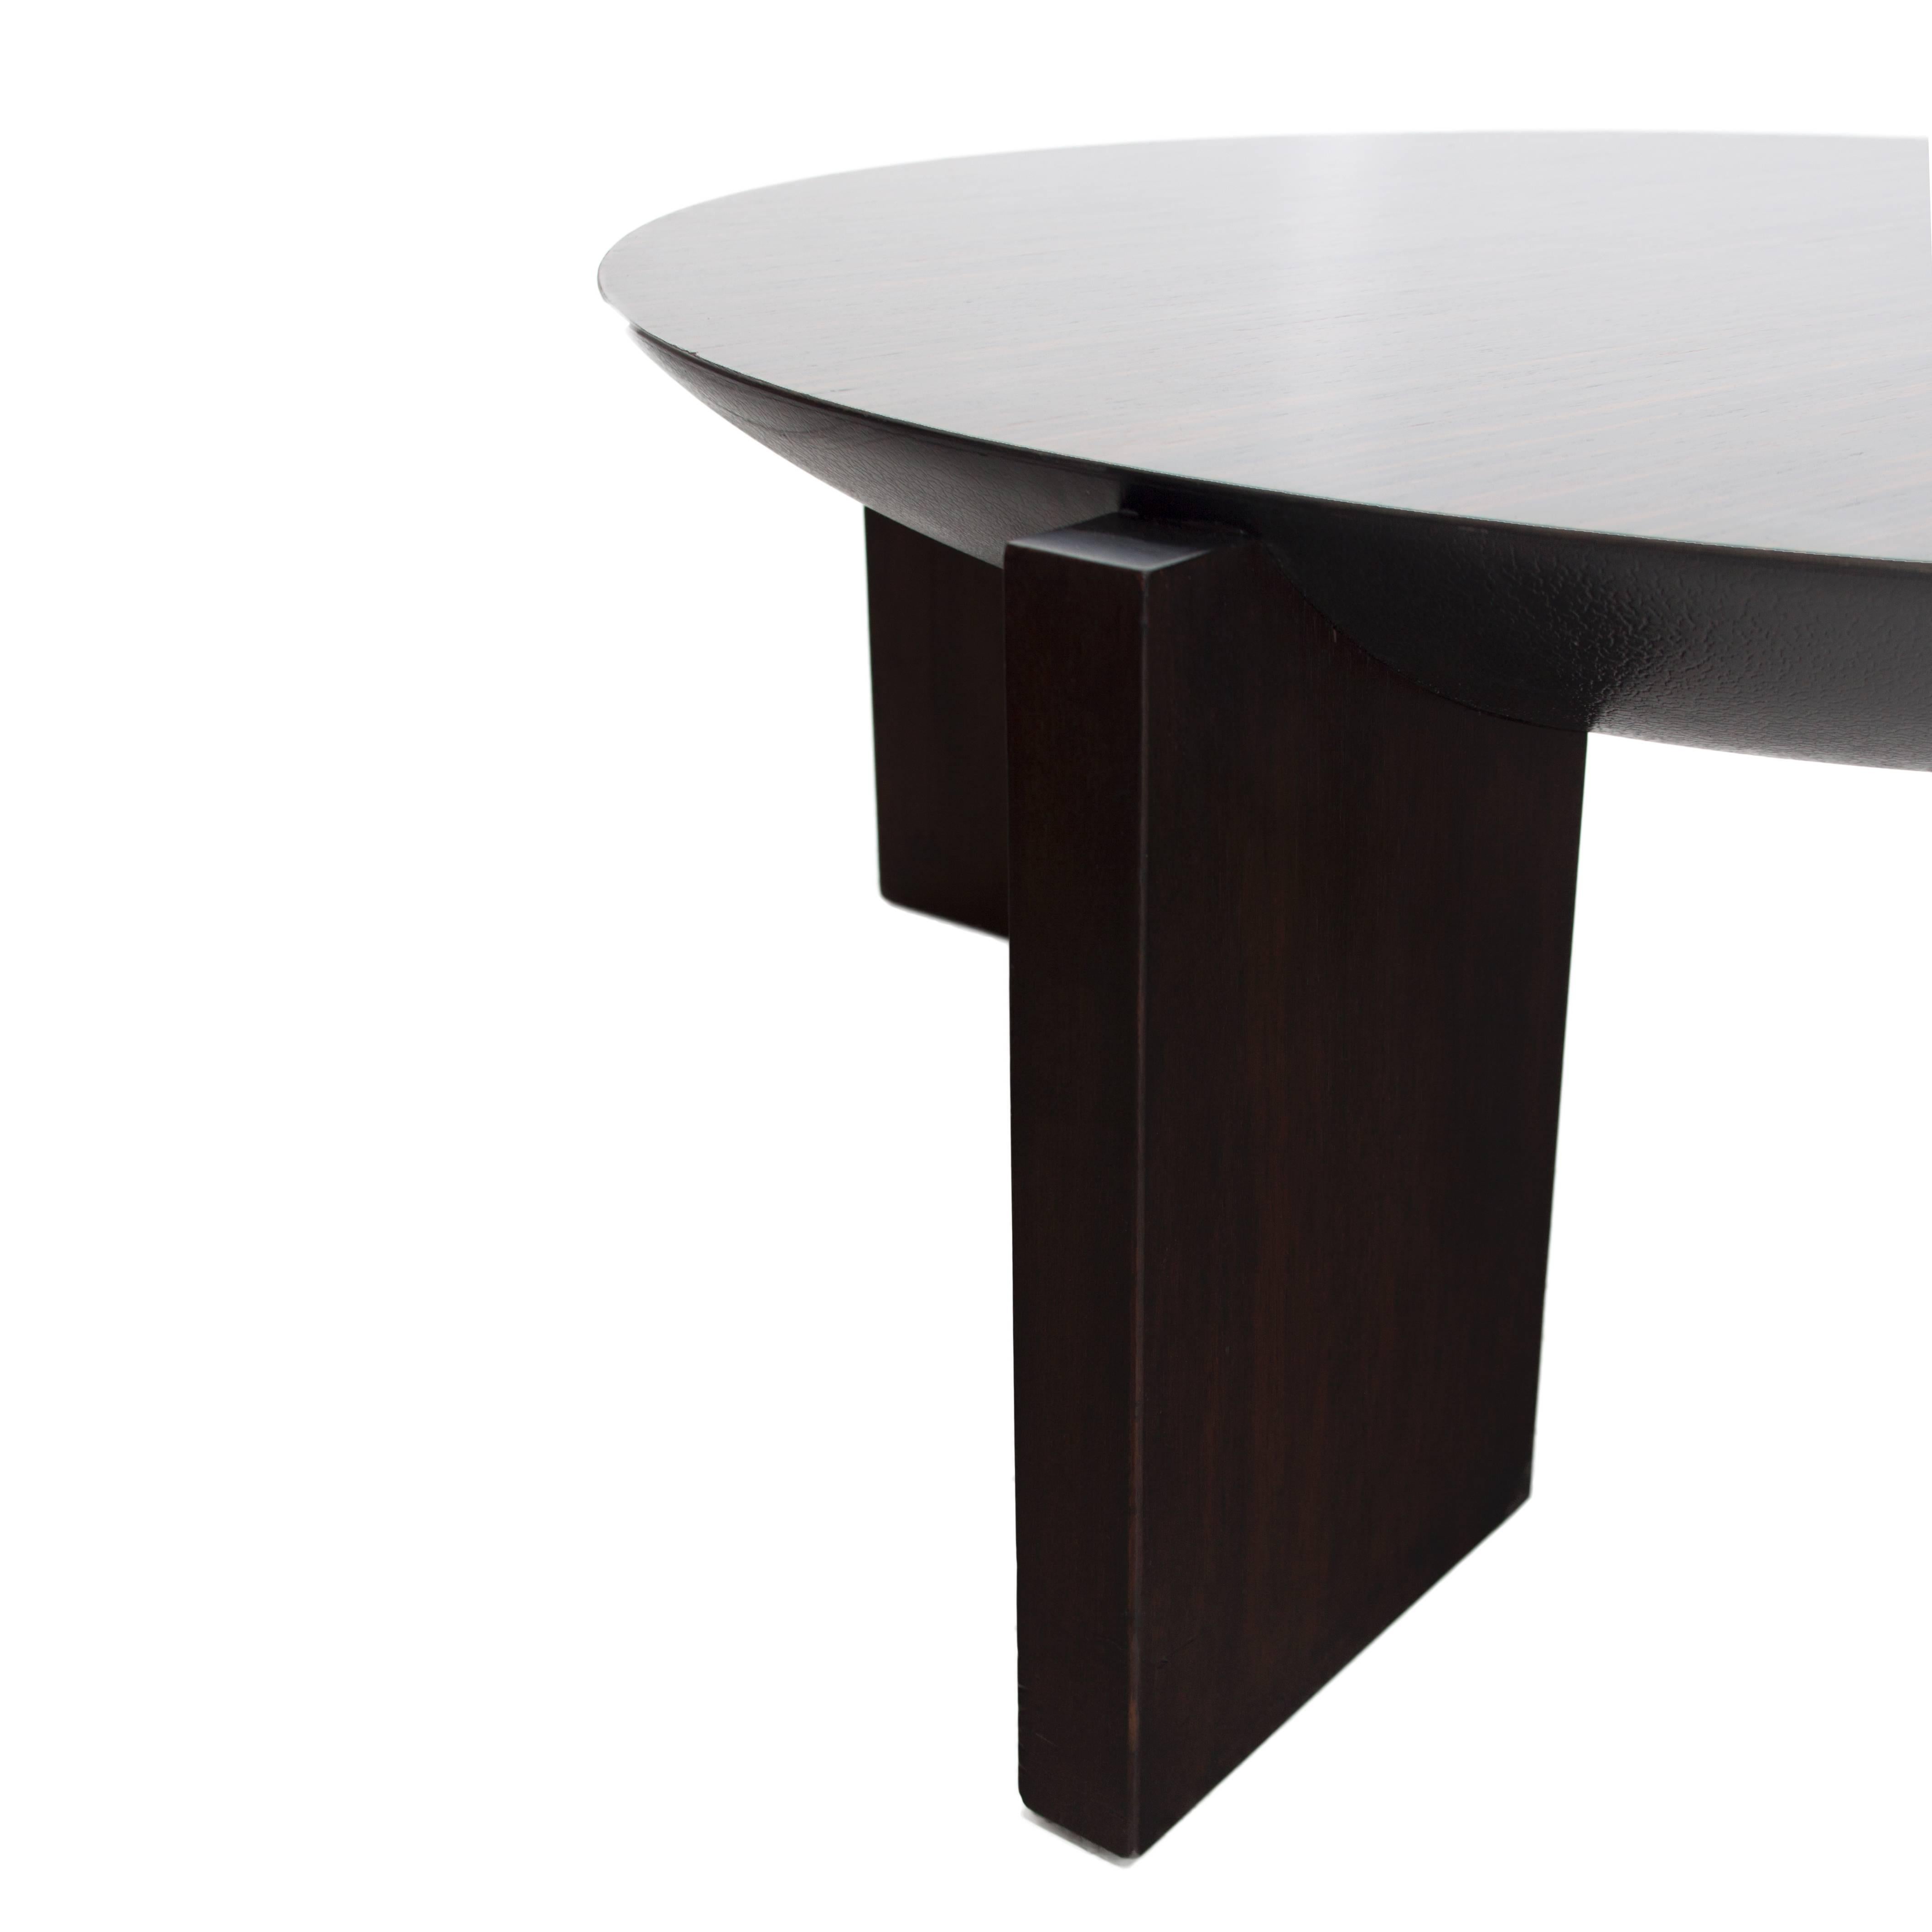 Wendell Castle Olympia Table with Macassar Ebony Top In Good Condition For Sale In Los Angeles, CA